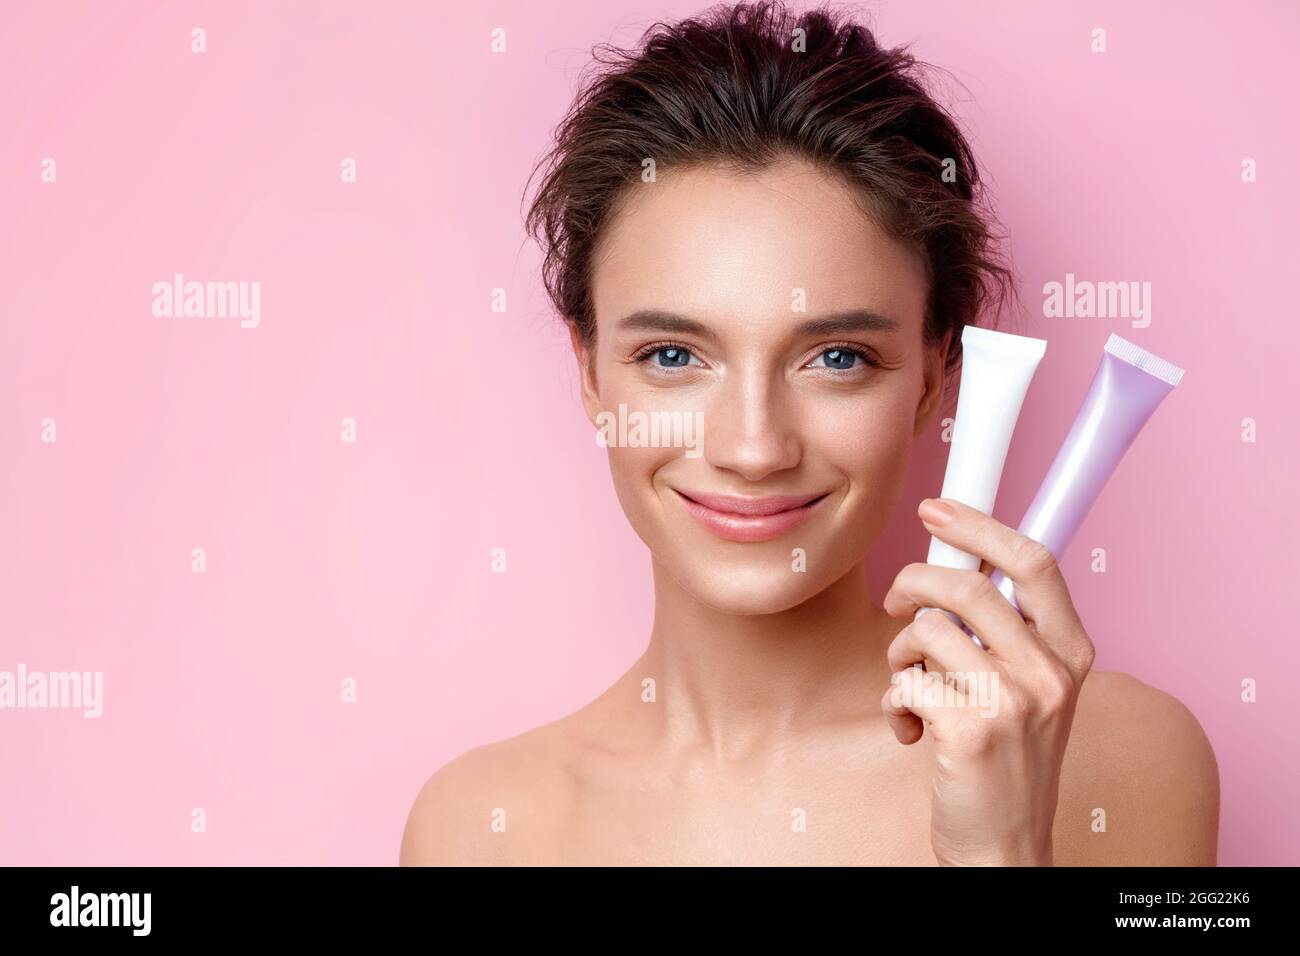 Smiling woman holds tubes with cosmetic cream. Photo of attractive woman with perfect makeup on pink background. Beauty concept Stock Photo